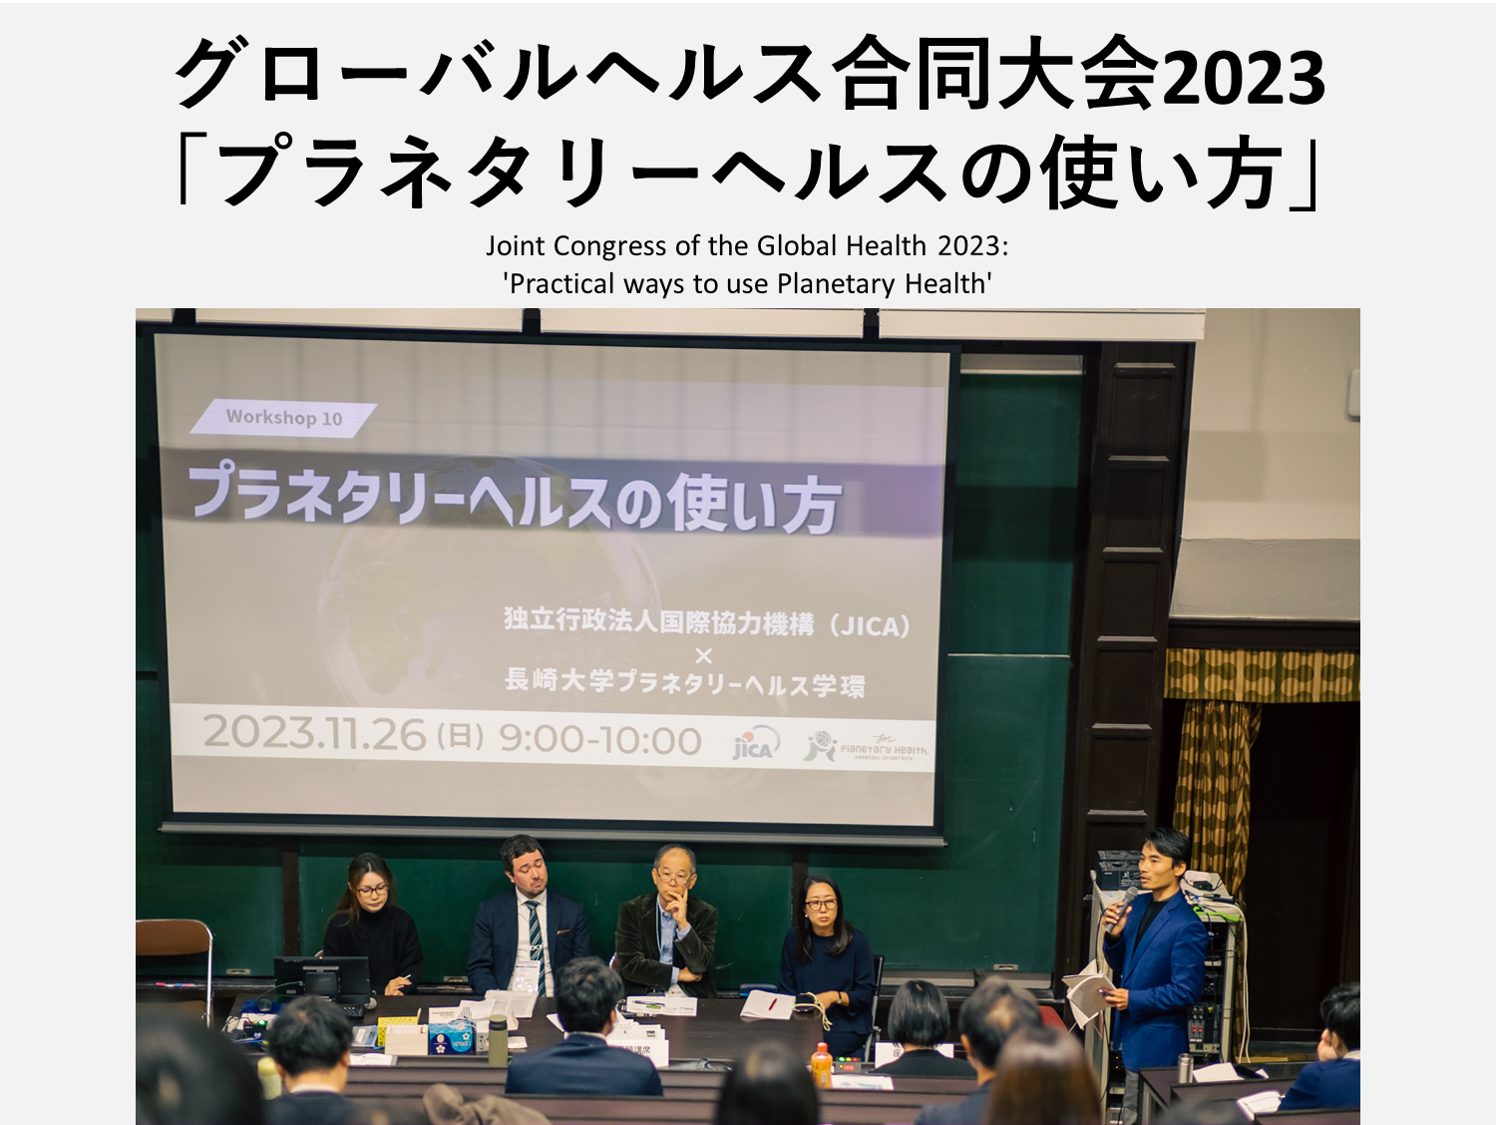 [Presentation Report] Joint Congress of the Global Health 2023: ‘Practical ways to use Planetary Health’ (64th Japanese Society of Tropical Medicine Conference, 38th Japanese Society of Global Health Conference, 27th Japanese Society of Travel Medicine Conference, 8th International Clinical Medicine Conference, Bunkyo City, Tokyo, November 26, 2023)